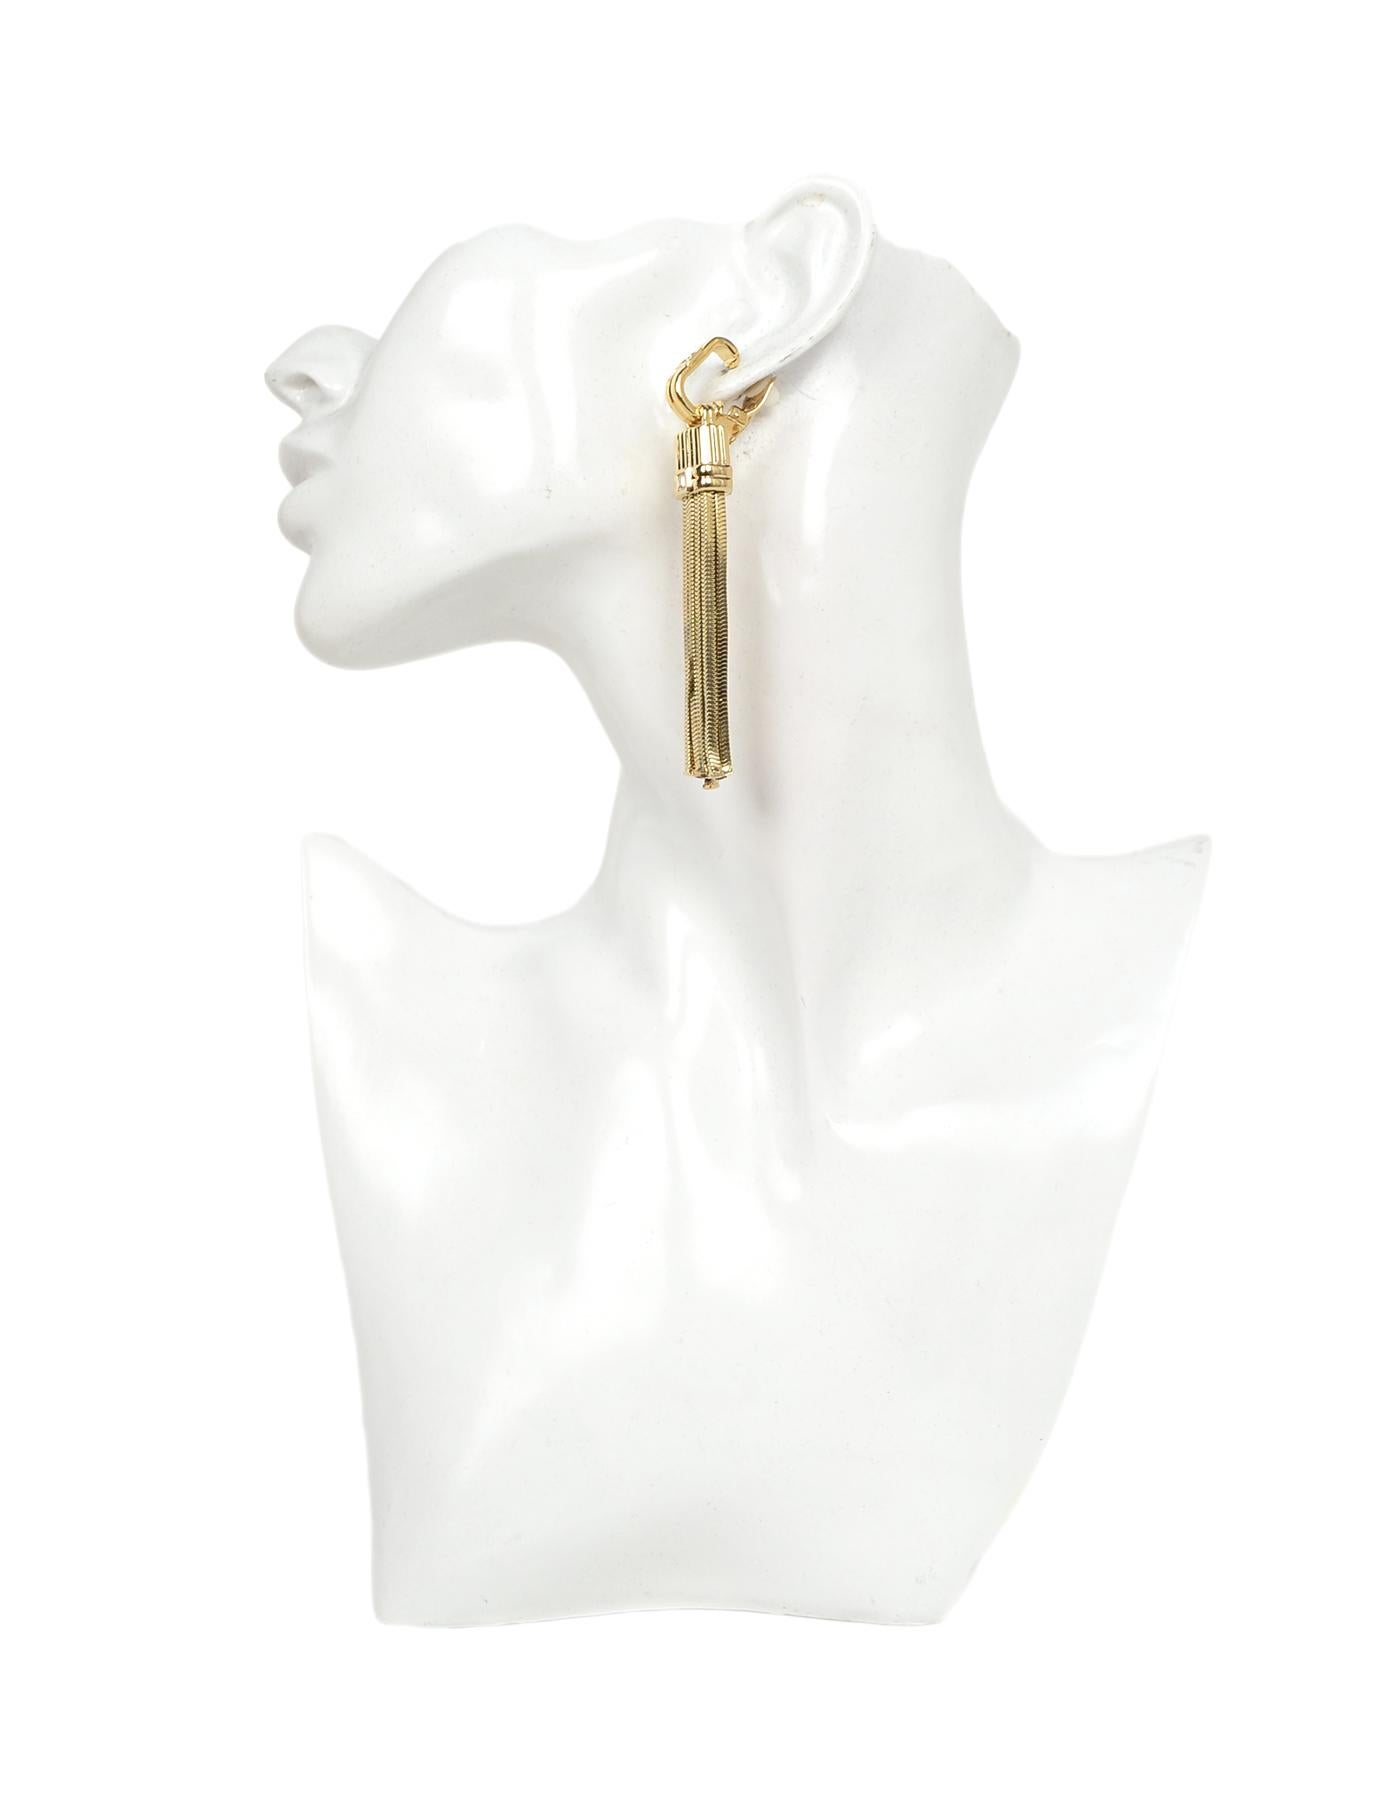 Lanvin Goldtone Chain Tassel Clip On Earrings W/ Crystals

Color: Goldtone, white
Materials: Goldtone metal
Hallmarks: On back of clip ons 